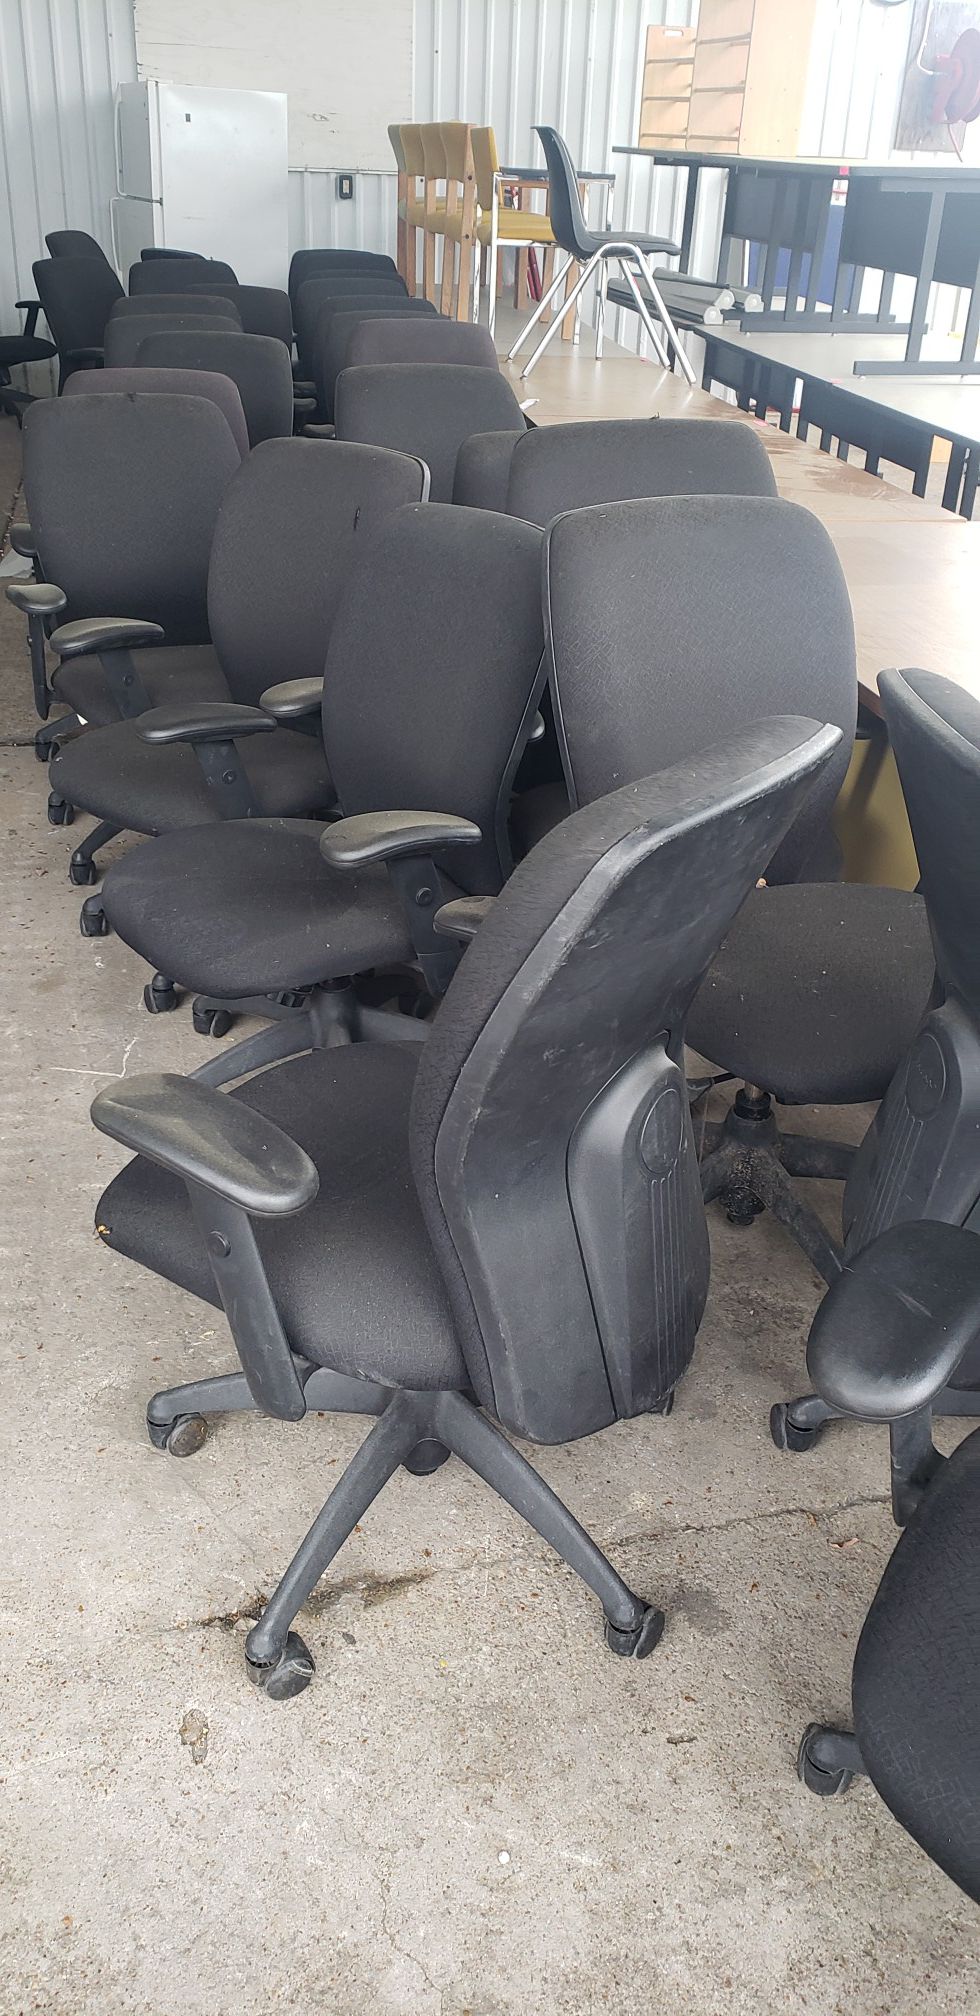 USED OFFICE CHAIRS FOR SALE!!!!.....Each